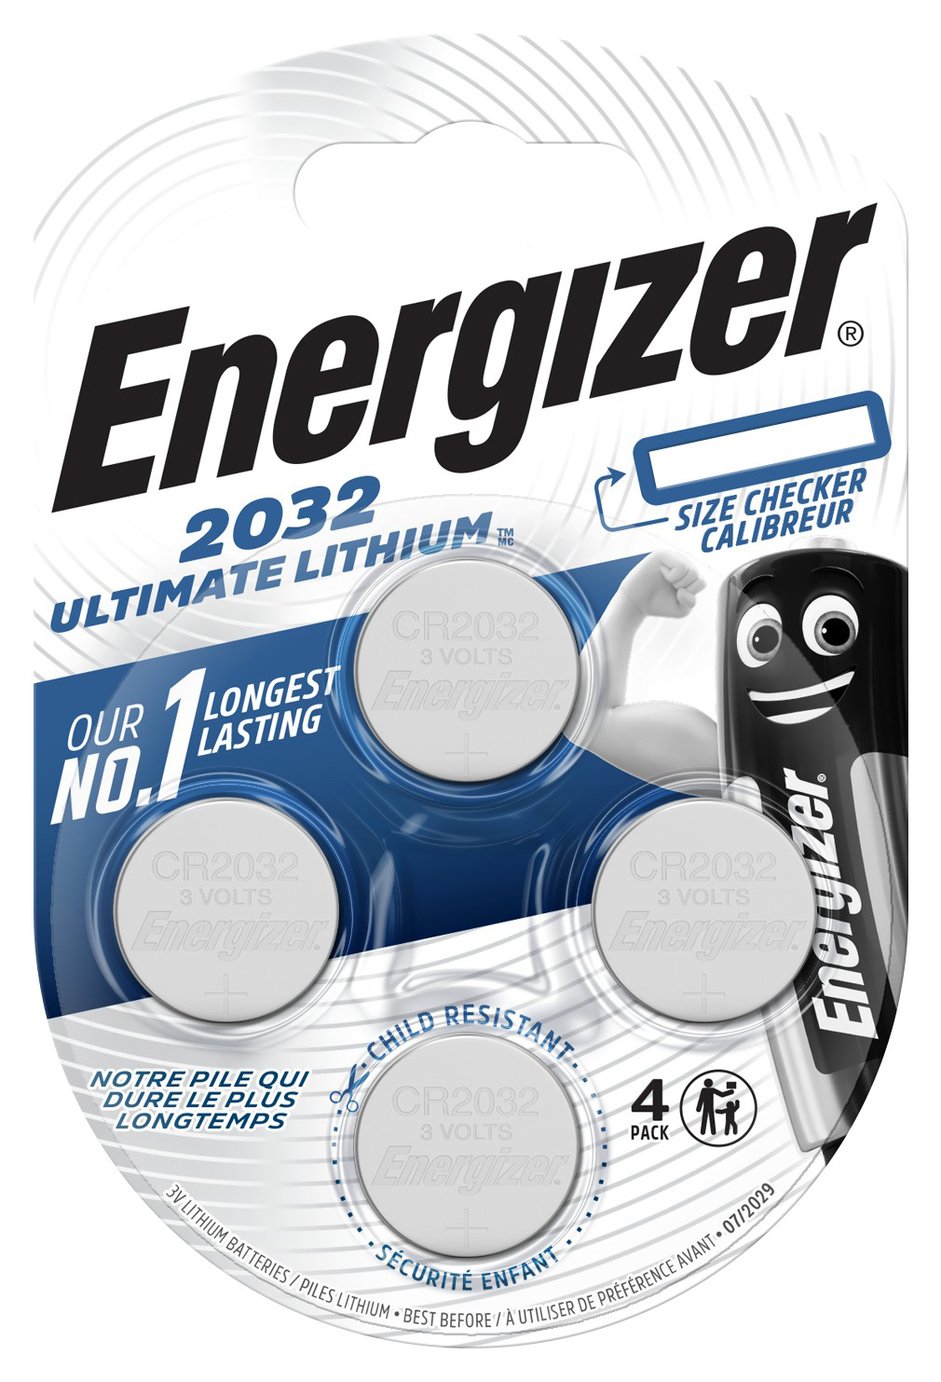 Energizer Ultimate Lithium 2032 Batteries - Pack of 4